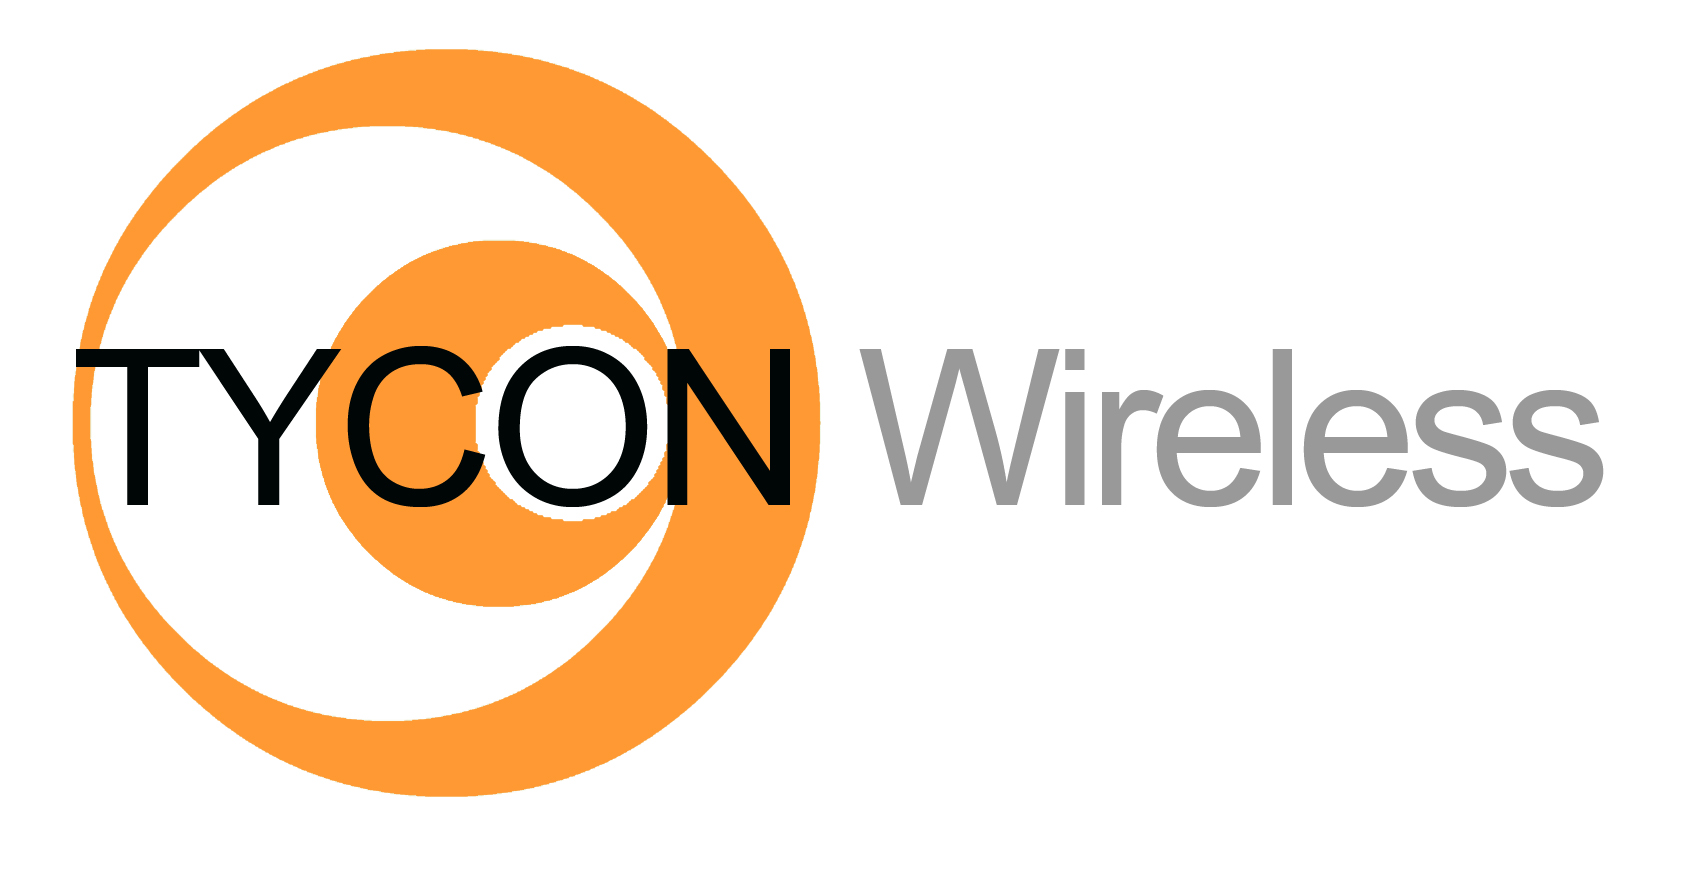 Tycon Wireless Products